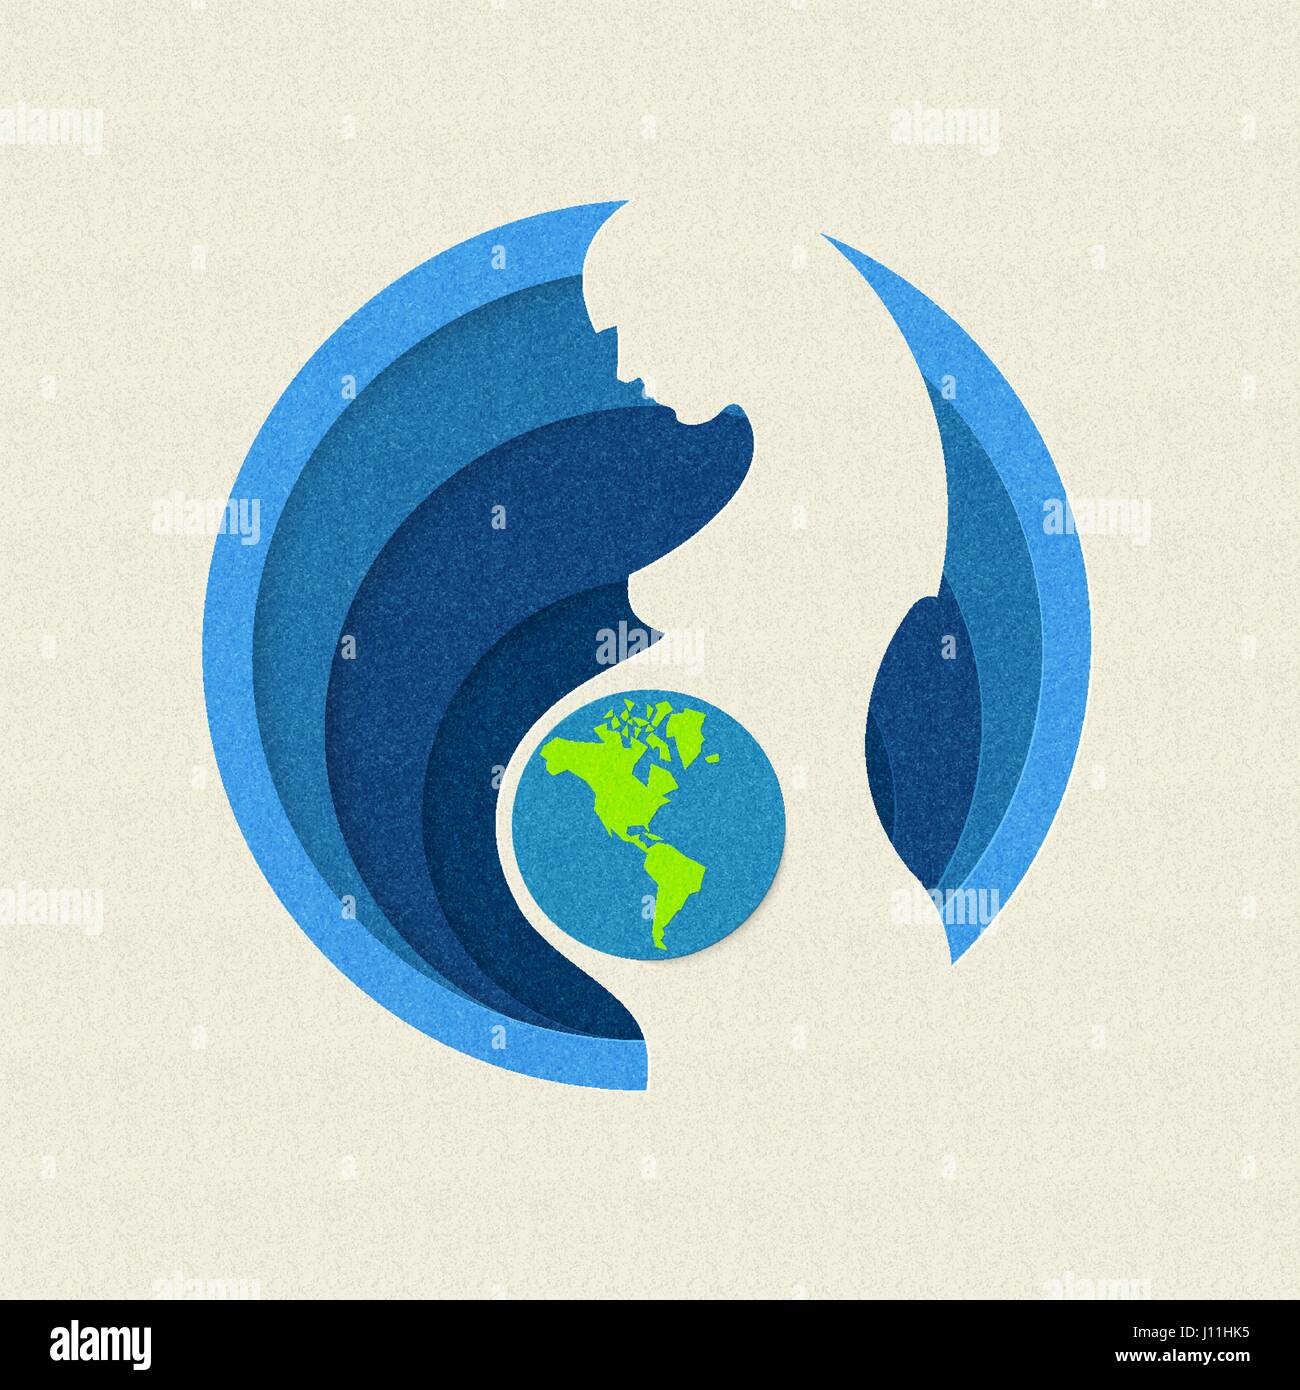 Earth day paper cut out illustration of pregnant woman silhouette with planet. Mother nature care concept. EPS10 vector. Stock Vector